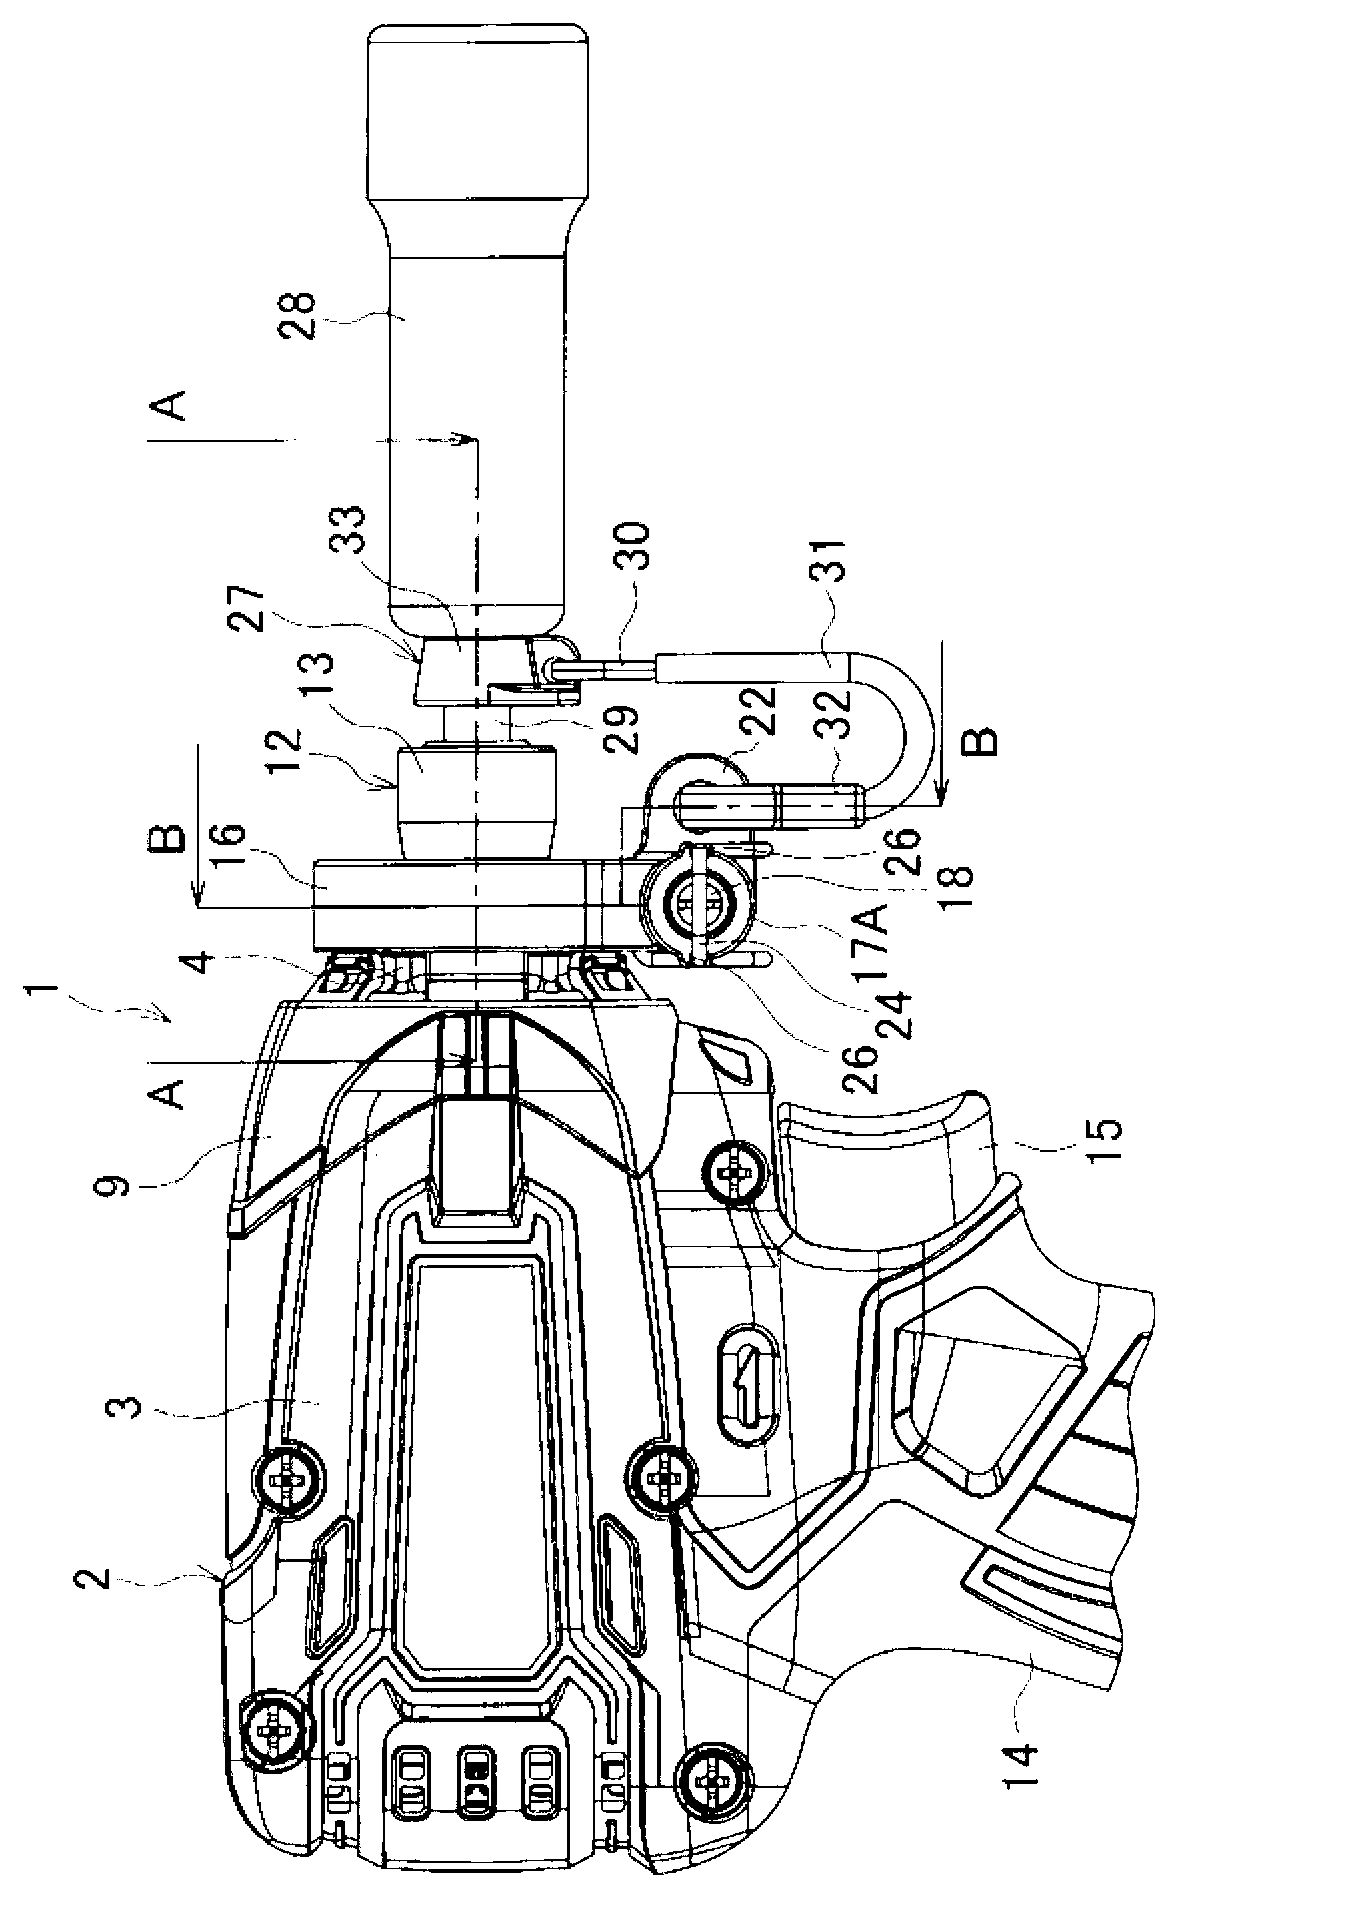 Falling Prevention Structure For Socket In Electric Power Tool